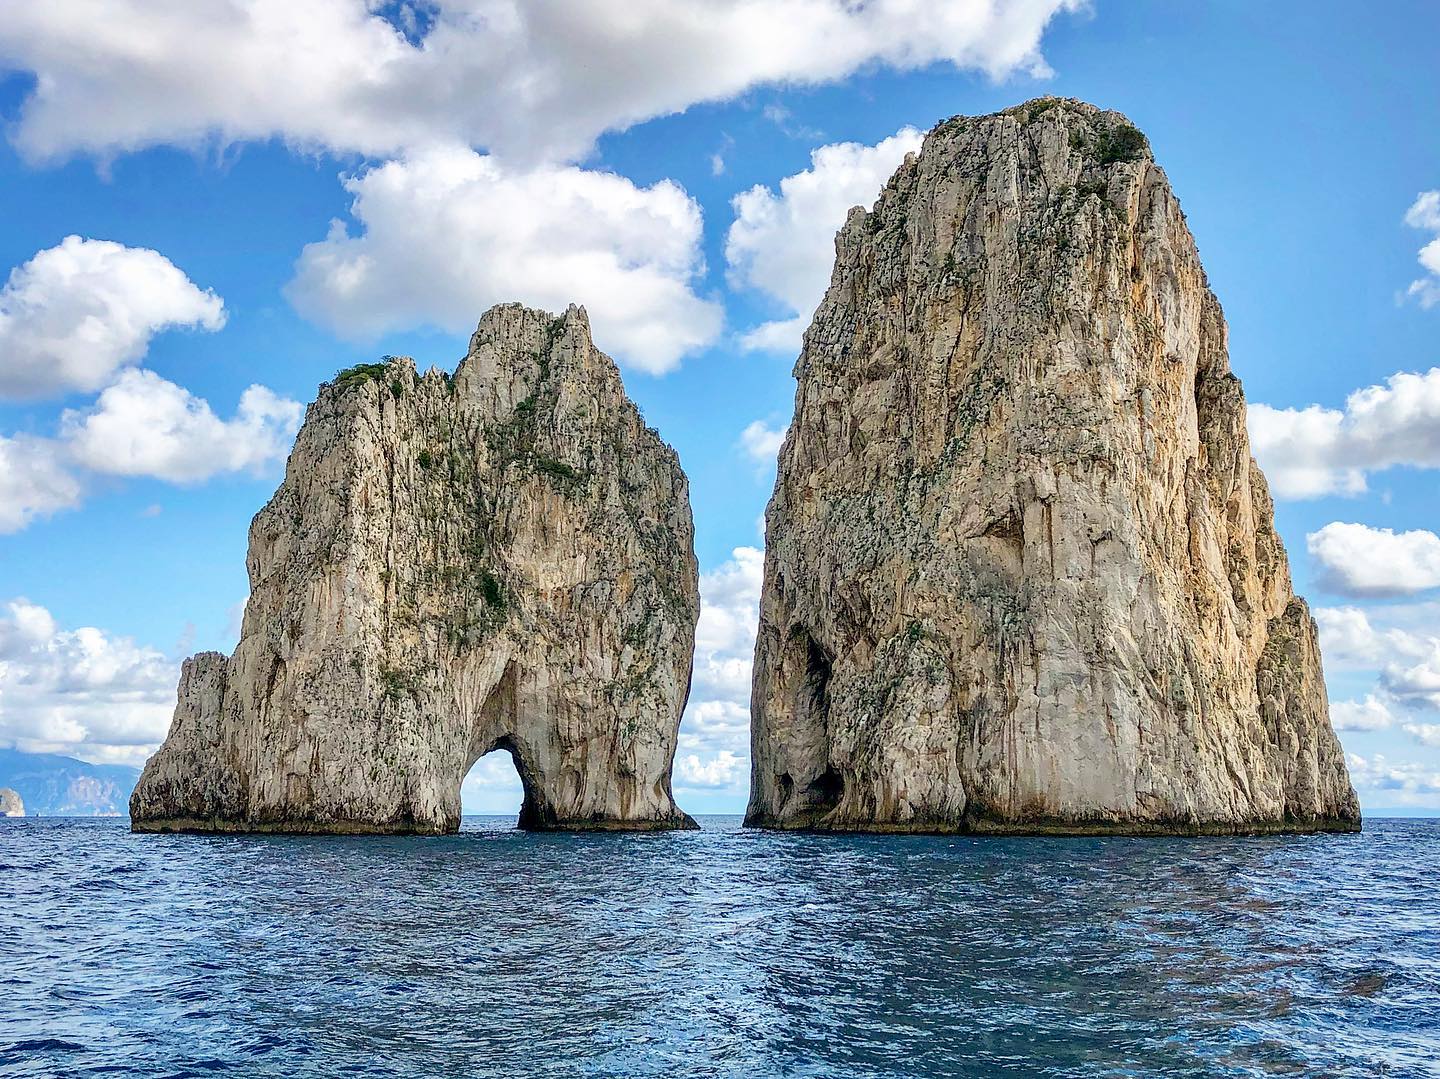 The Faraglioni of Capri are very famous all over the world. Here in this picture you see Mezzo (the small one with the natural arch) and Scopolo. The third one (Stella) is on the left and not in the picture.
.
.
.
#capri #capriitaly #capriamalfi #capriamalficoast #amalfi #amalficoast #amalfiküste #amalficoastitaly #amalfitancoast #amalficoast_italy #positano #faraglioni #faraglionirocks #faraglionidicapri #faraglionidiscopello #faraglionicapri #rocks #sea #turquoise #sealovers #seaside #italia #italy #italiacapri #italycapri #caprifaraglioni #stella #mezzo #scopolo #travel